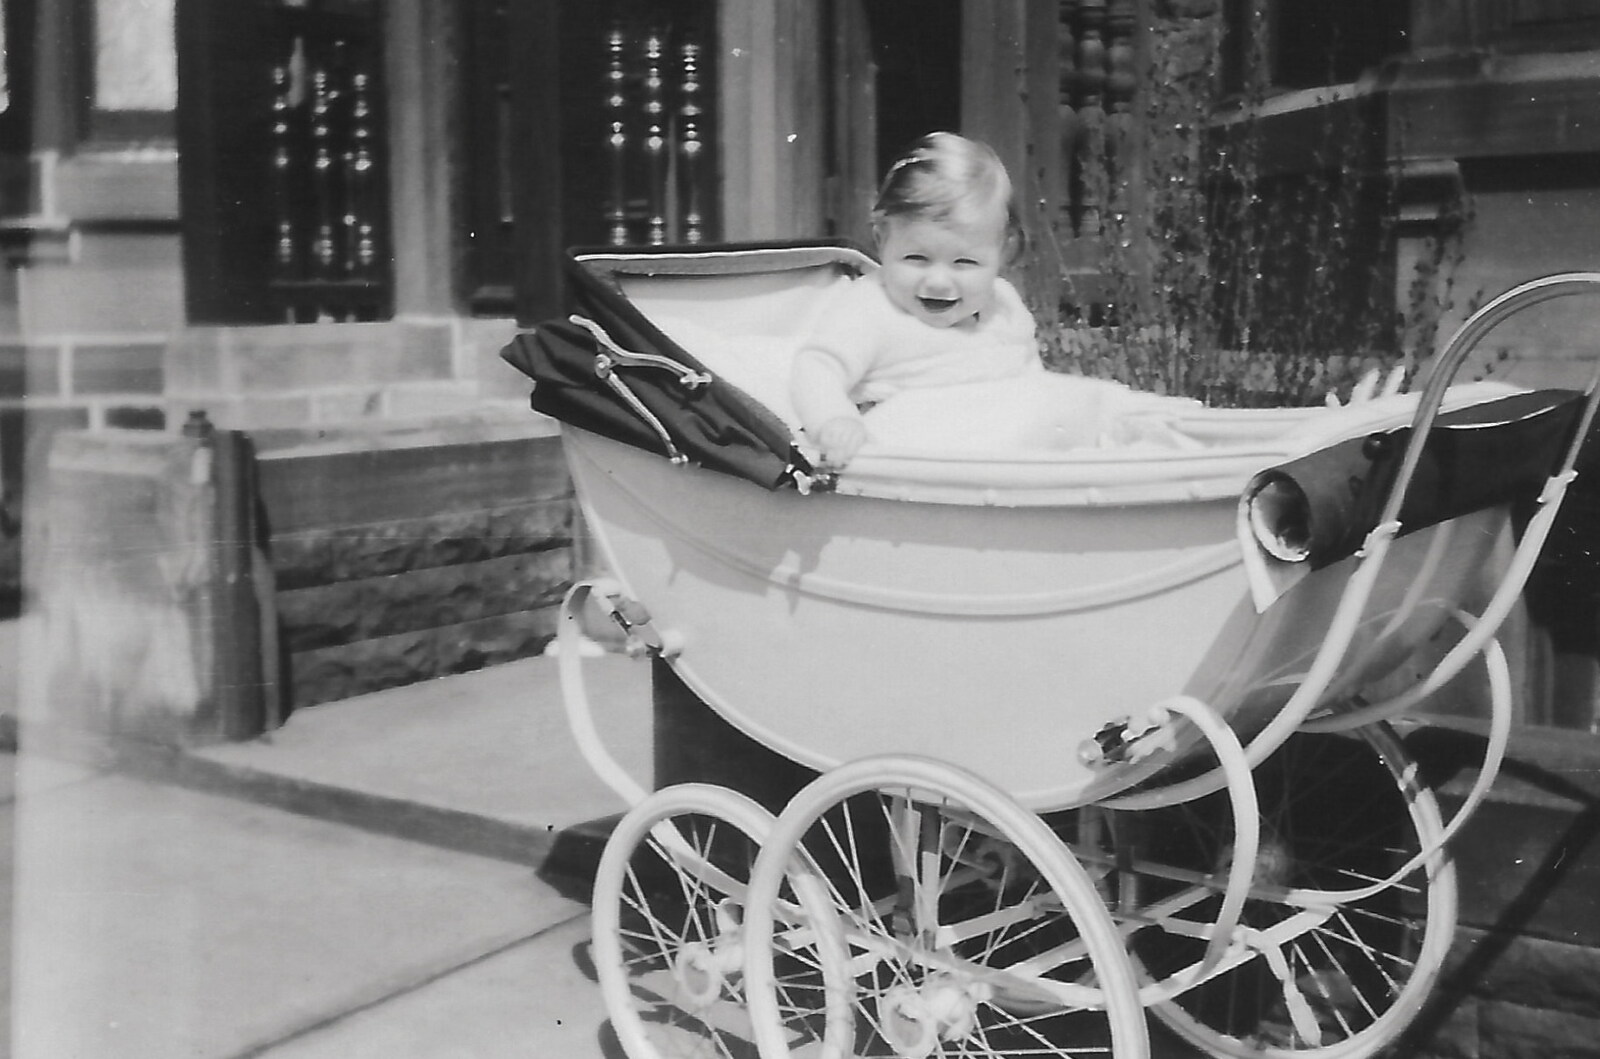 Family History: The 1940s and 1950s - 24th January 2020: Neil in a pram